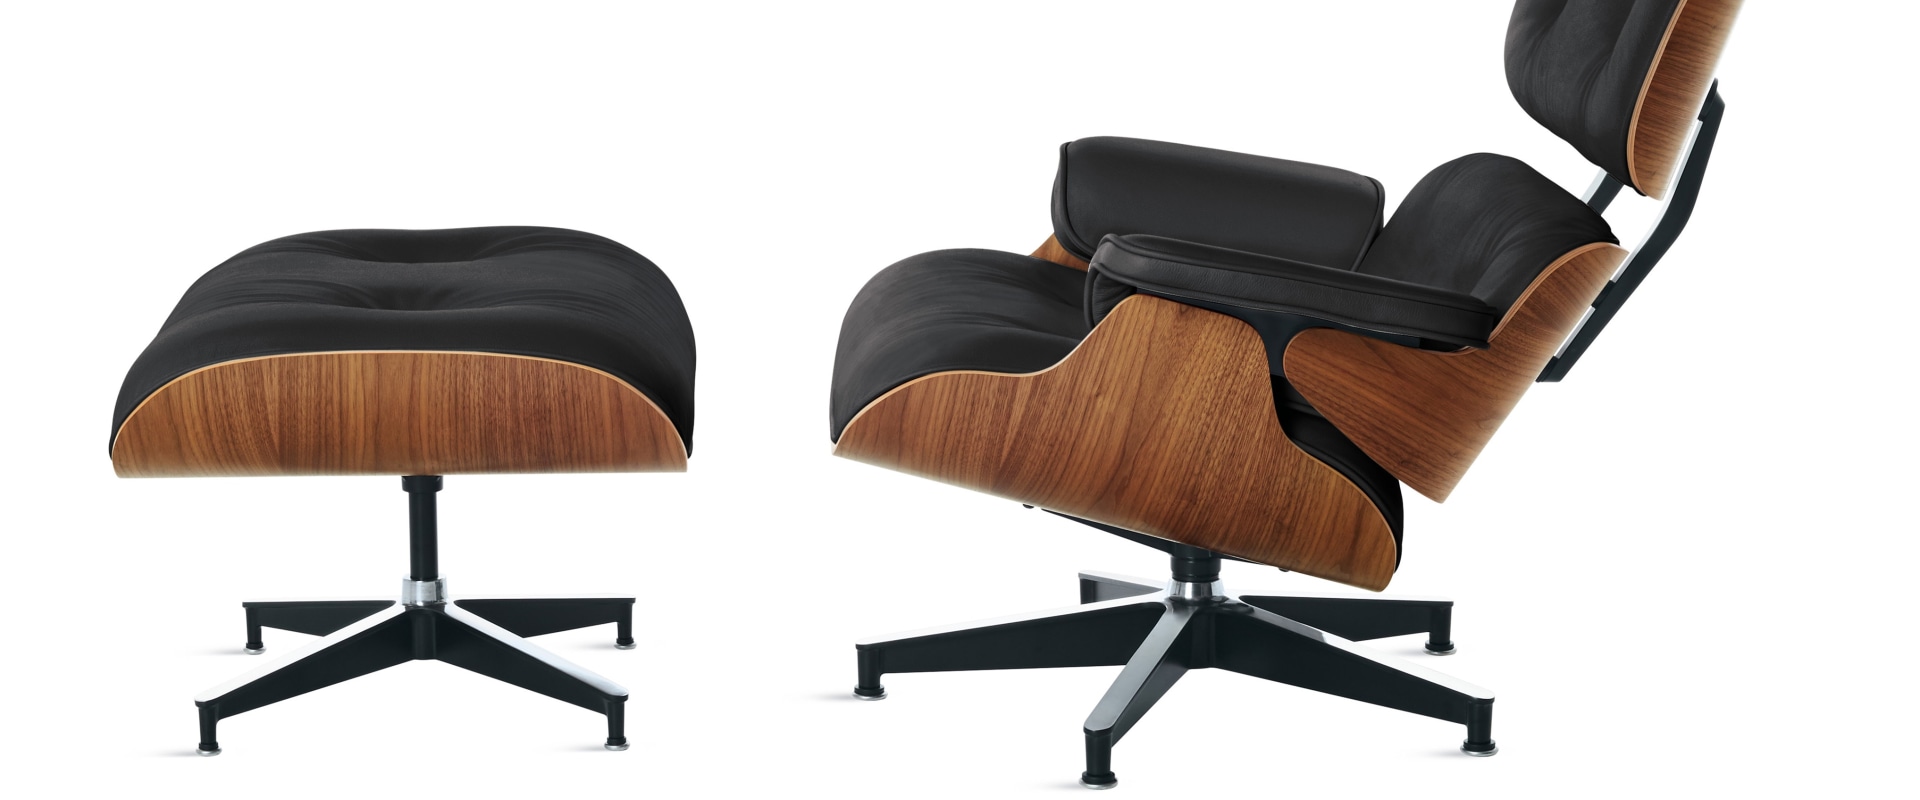 Exploring the Special Features of an Eames Office Chair Replica